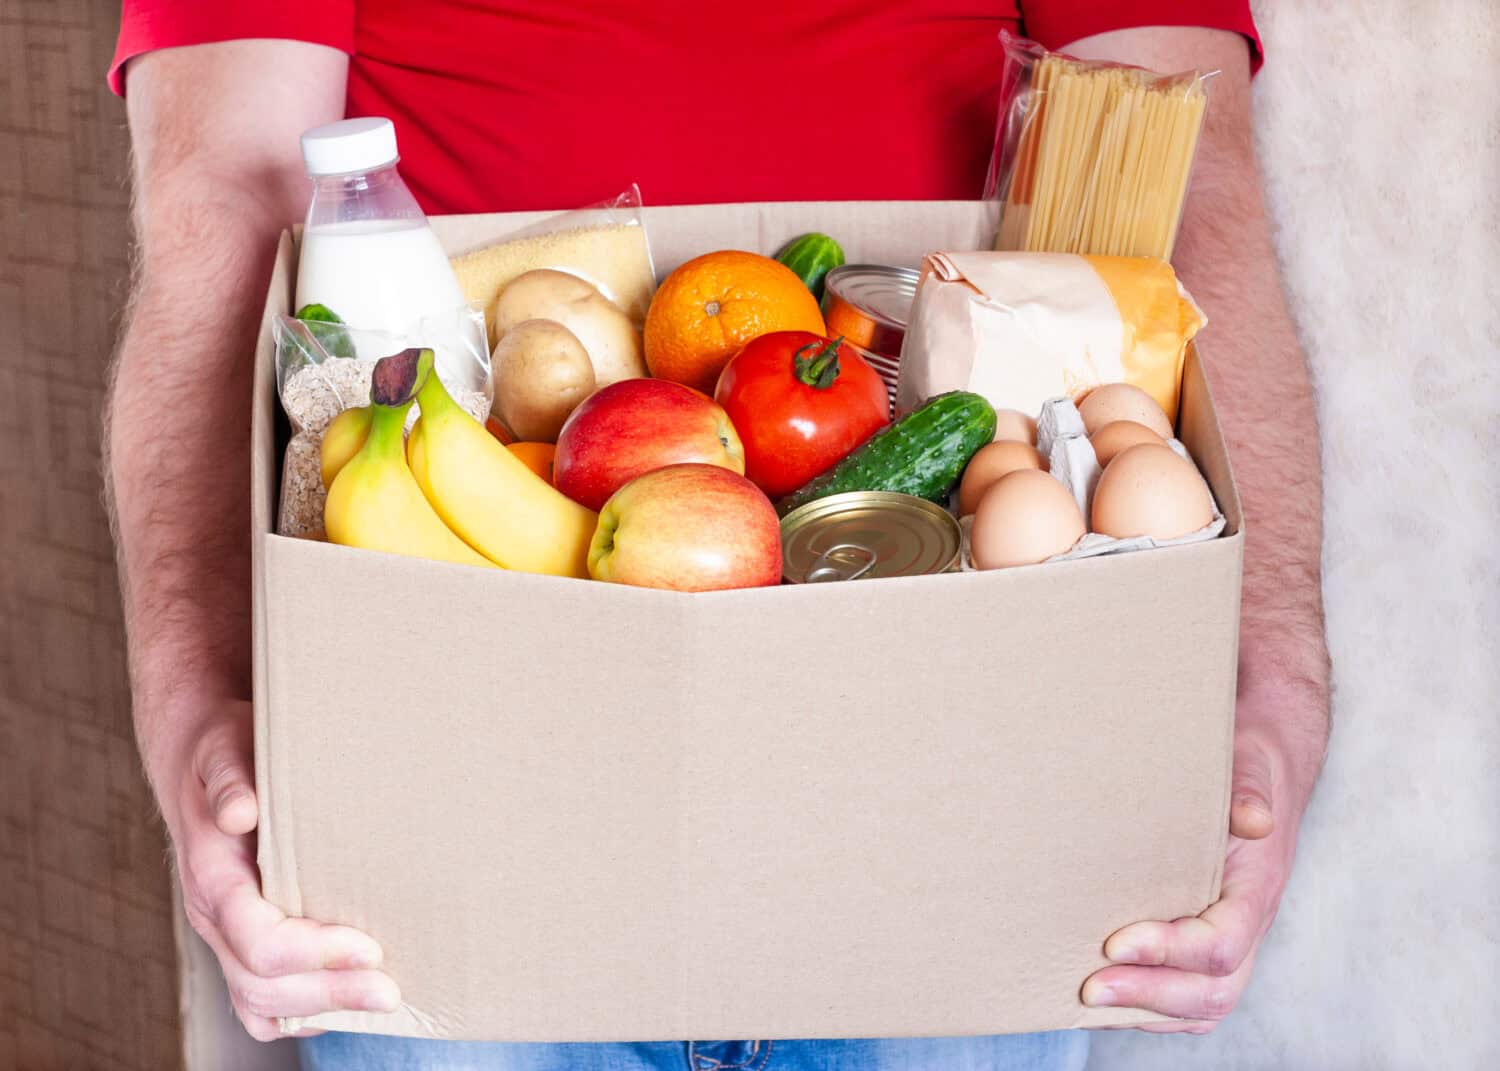 Grocery delivery courier man in red uniform holds cardboard box with fresh vegetables, fruits and other food. Express food delivery, donation concept.